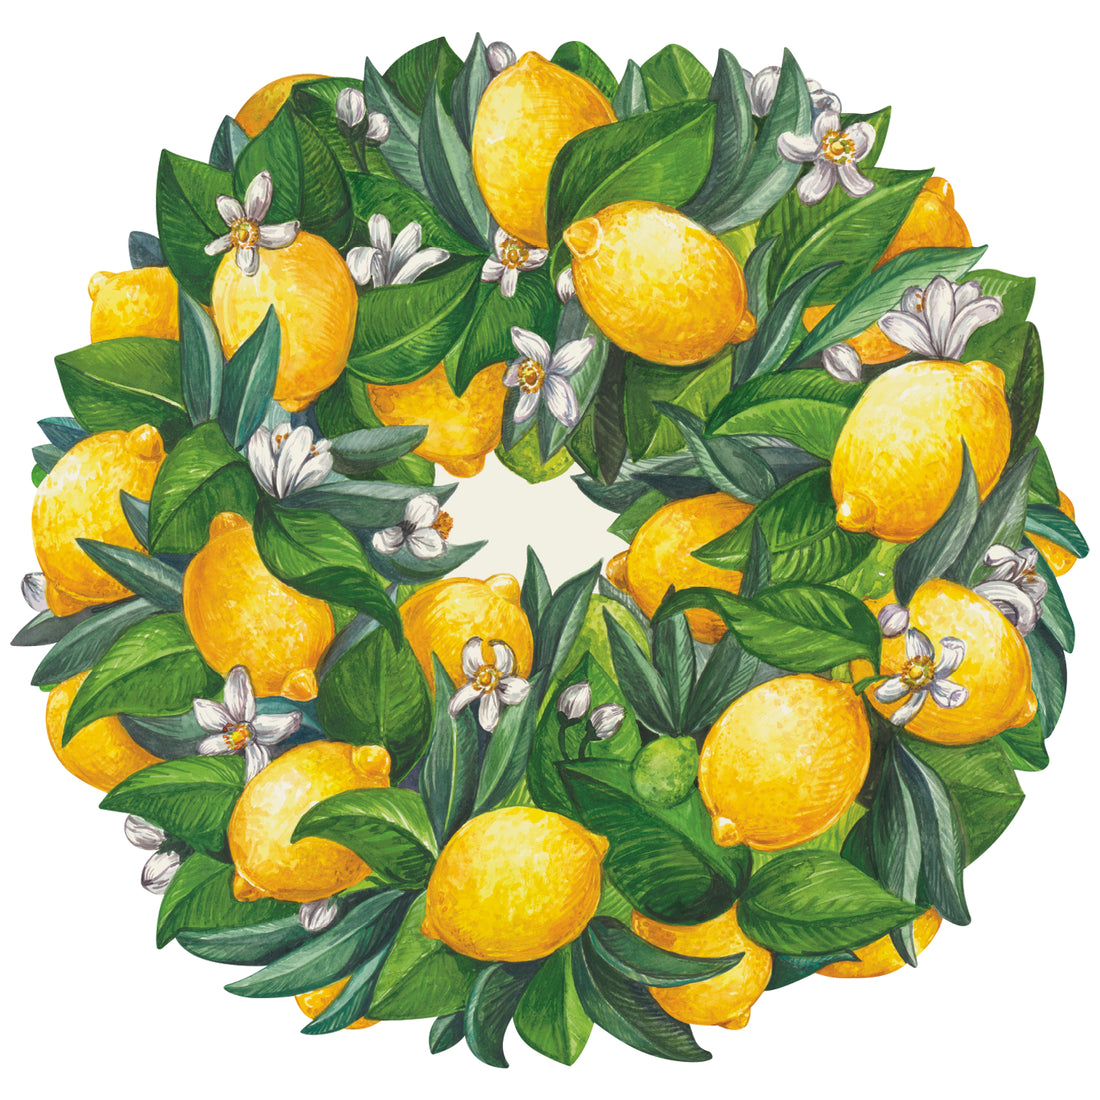 A round, die-cut illustration of a wreath of vibrant yellow lemons packed with green leaves and white blooms, with a blank white center.